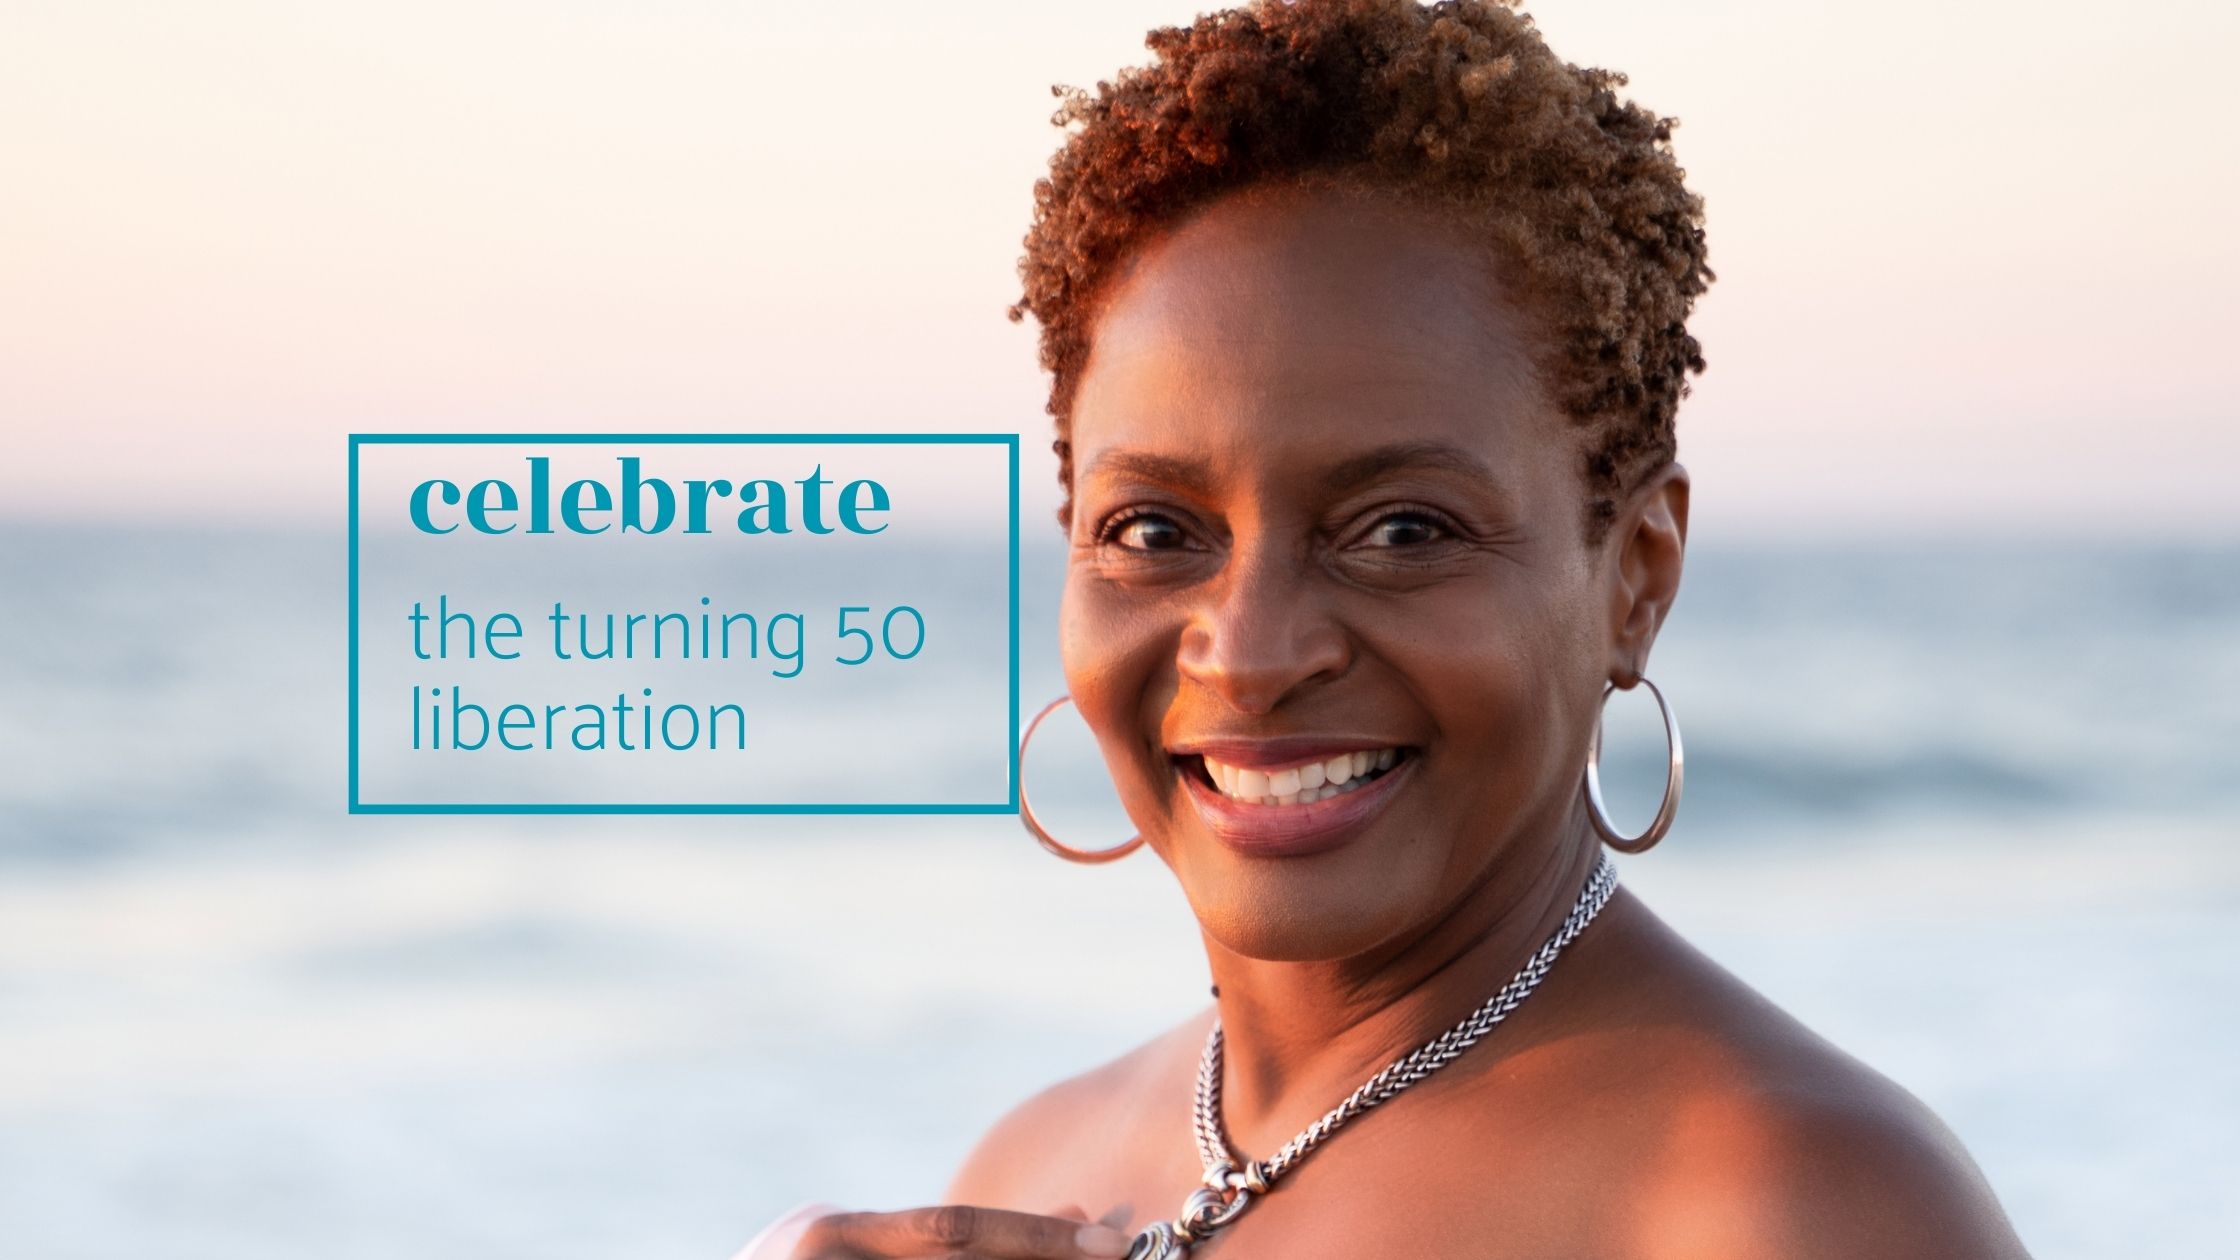 the bright side of turning 50 shows a vibrant woman